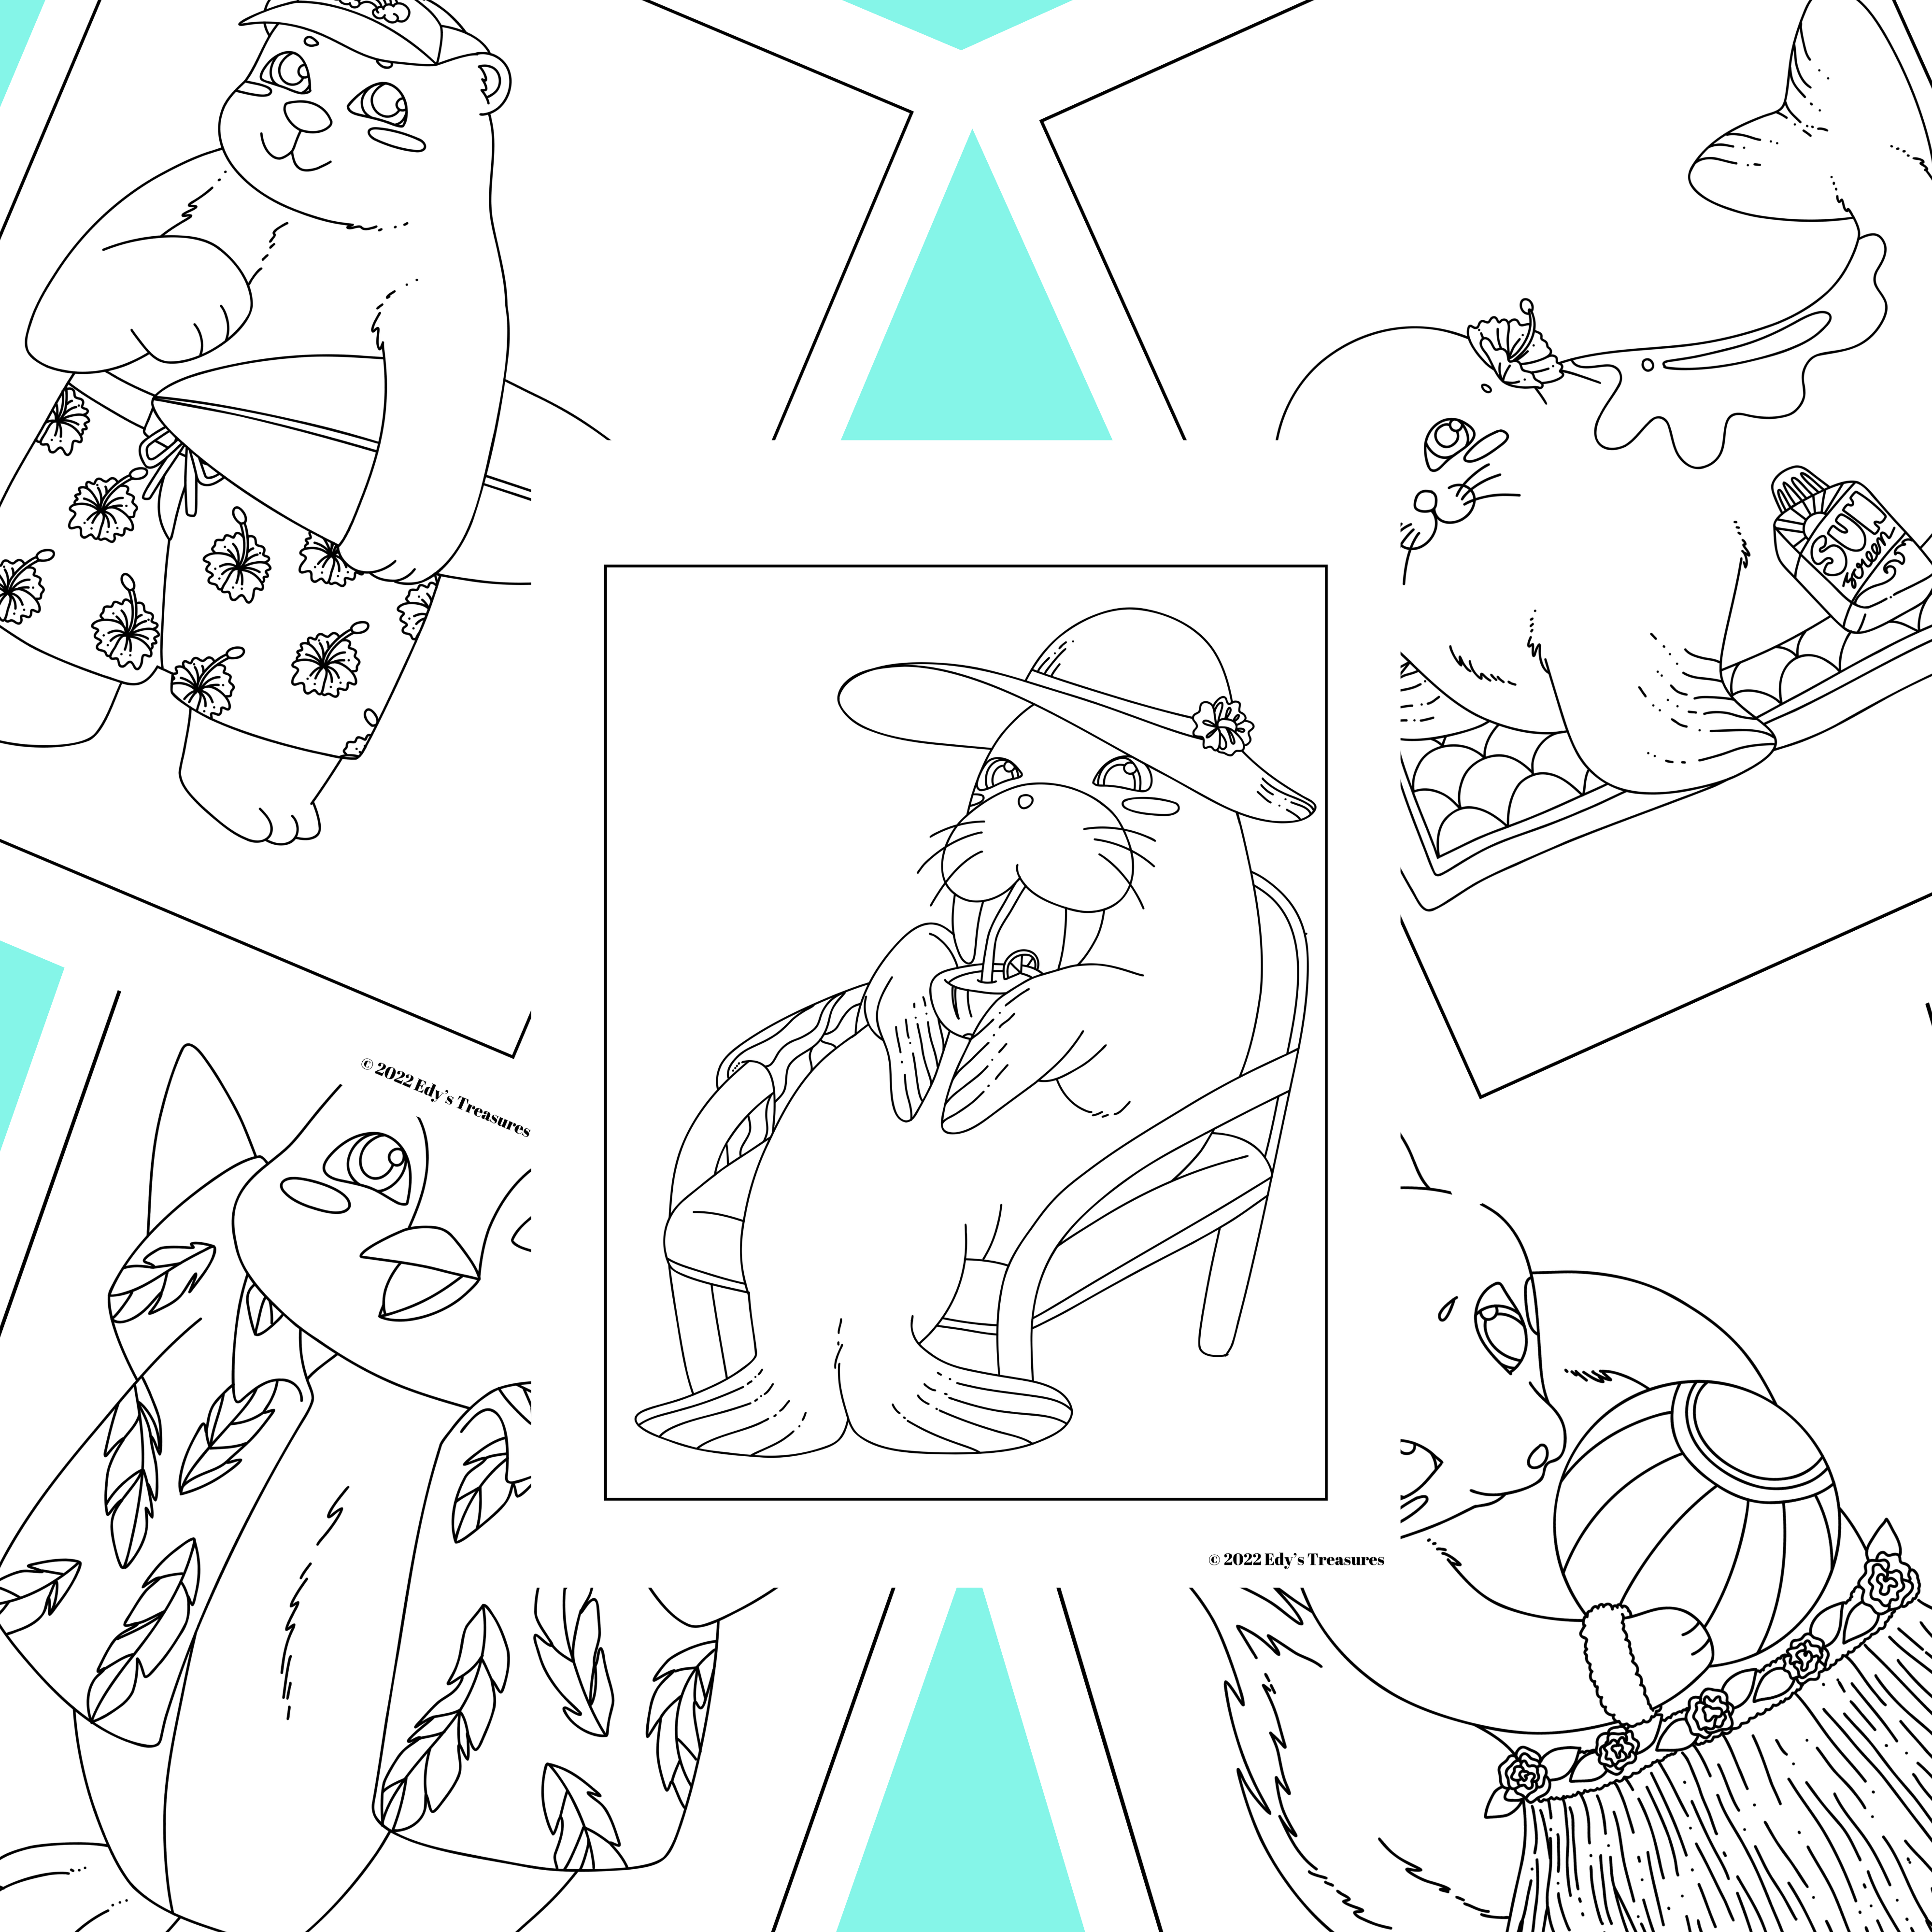 Arctic Animals Coloring Pages - Edy's Treasures